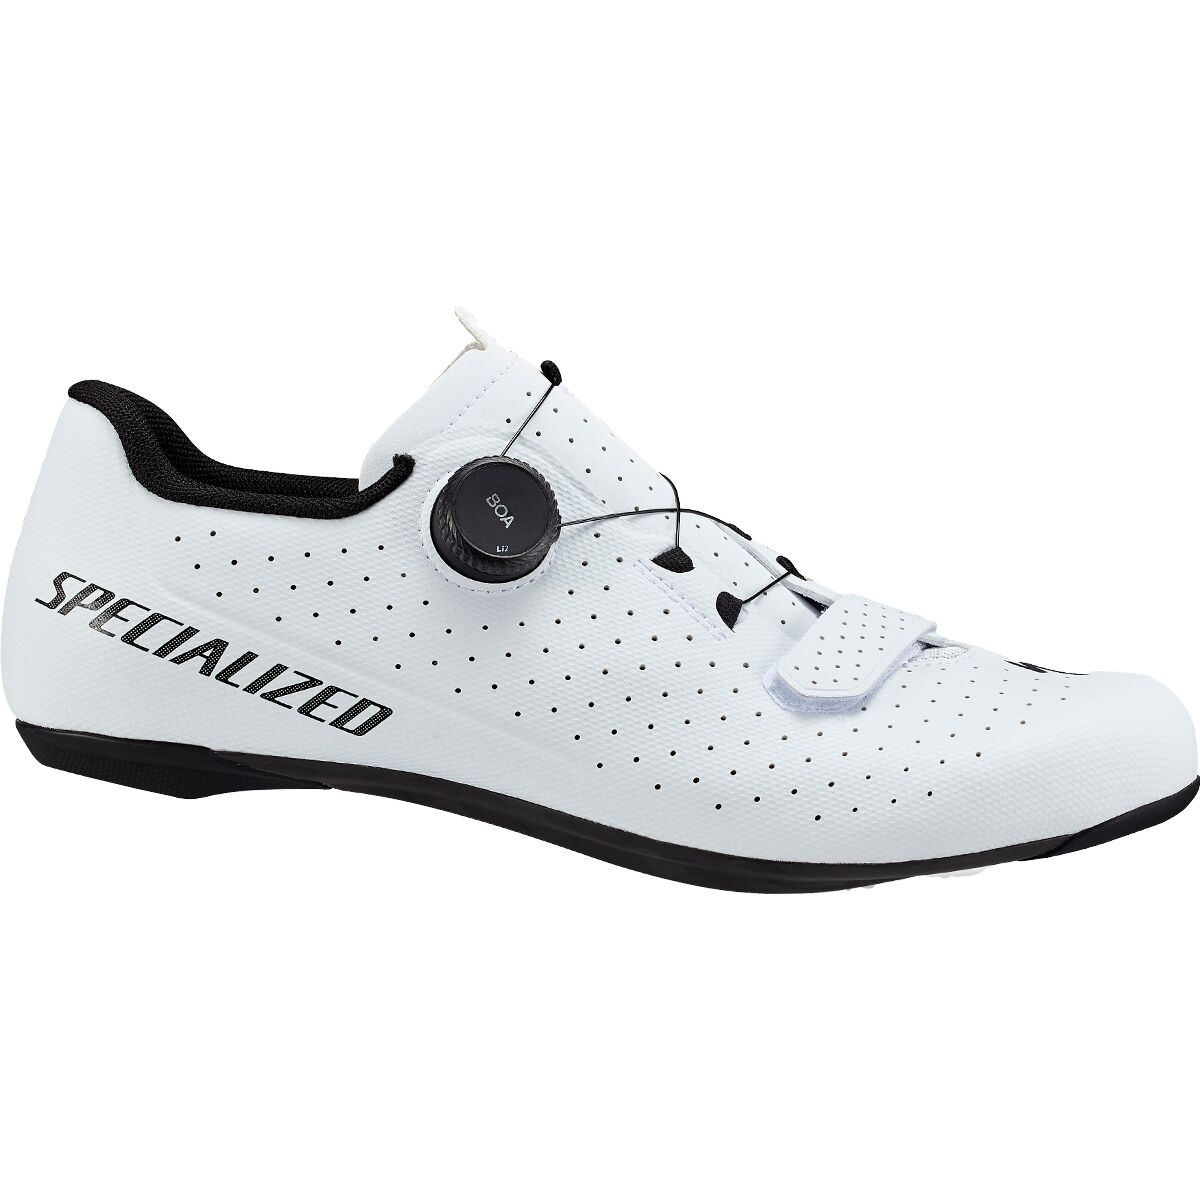 Specialized Torch 2.0 Cycling Shoe White, 42.5 - Men's